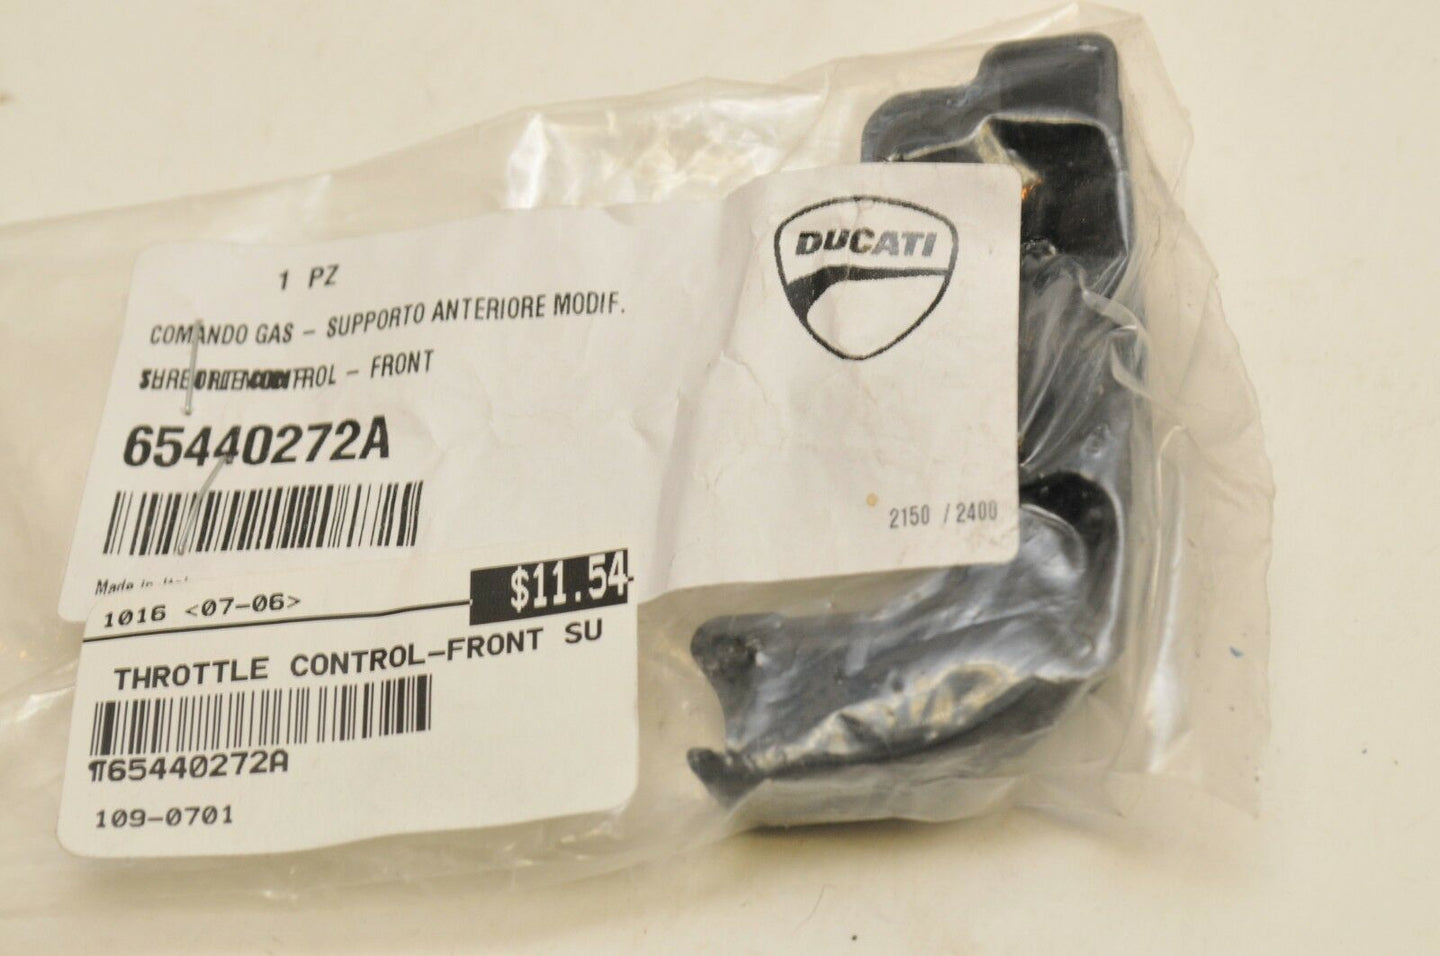 NEW OEM DUCATI 65440272A THROTTLE CONTROL FRONT SUPPORT (MODIFIED/UPDATED)